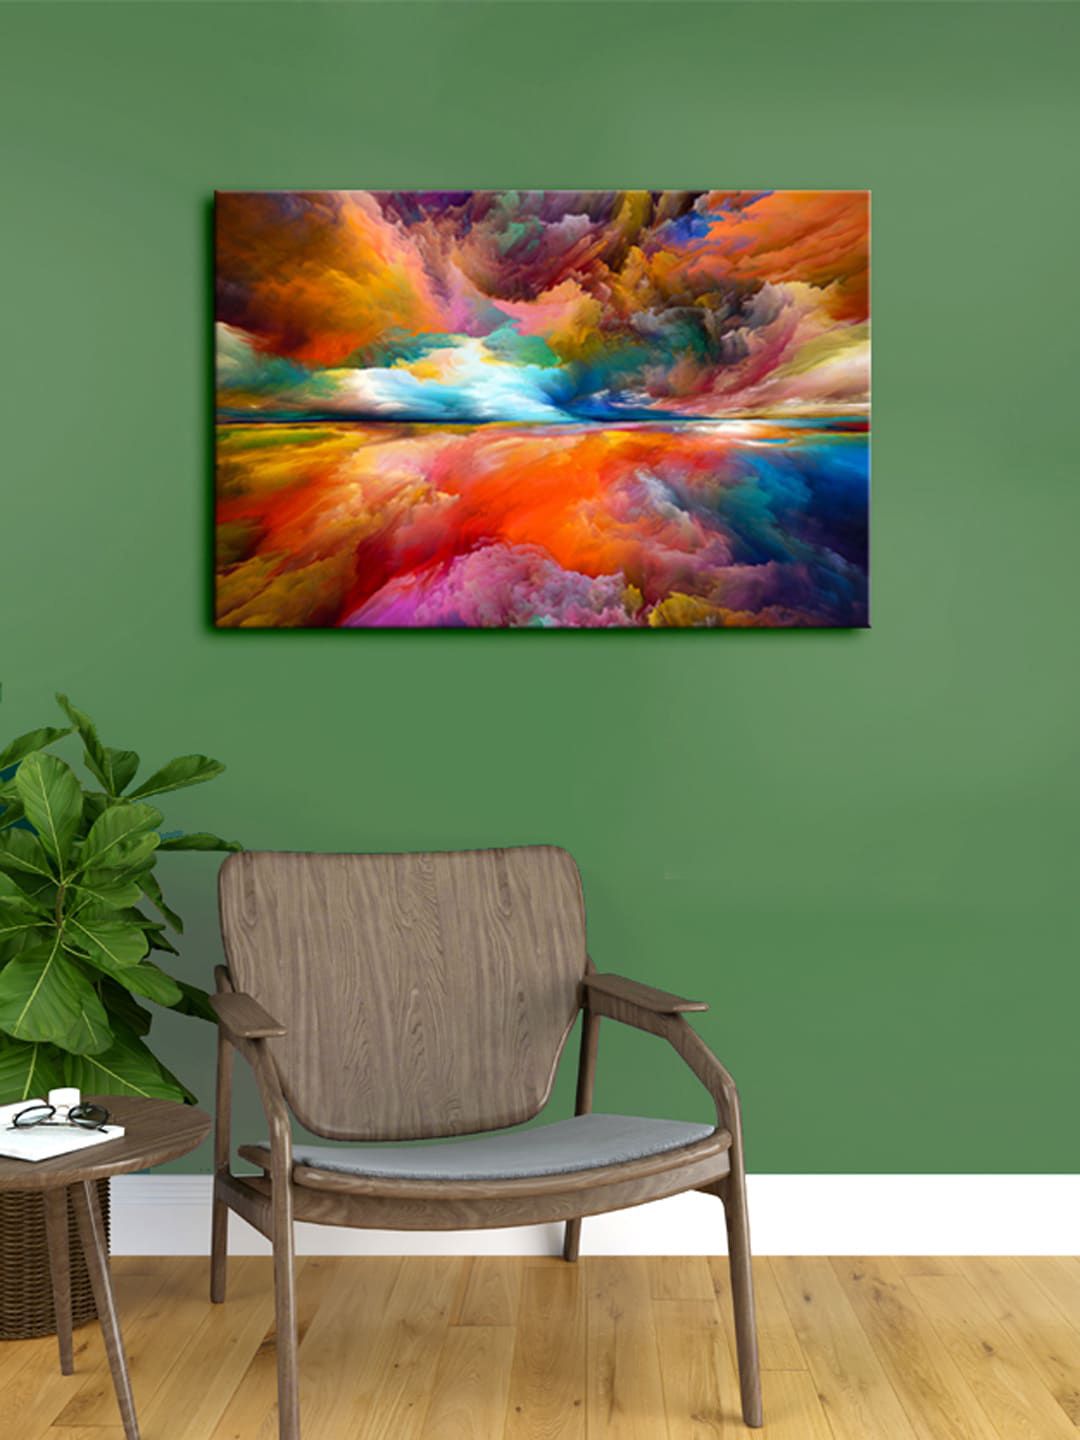 999Store Orange & Blue Abstract Sky Art Framed Canvas Painting Wall Art Price in India